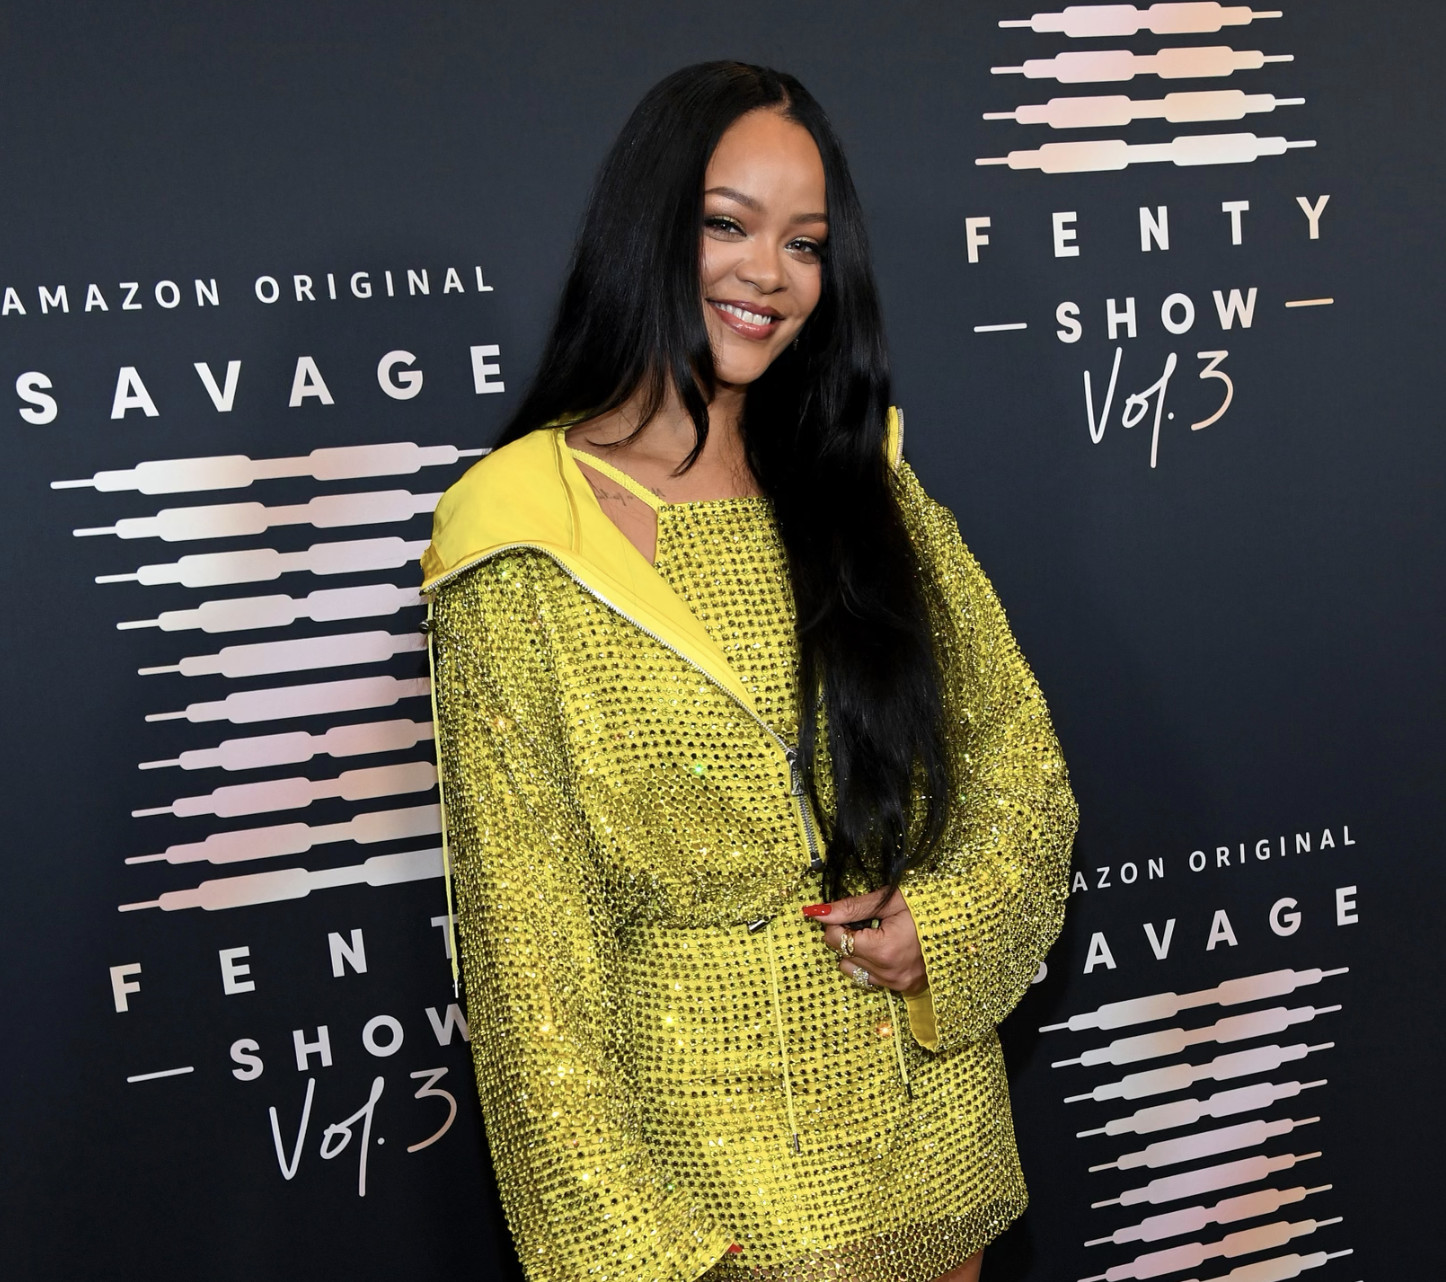 Rihanna Previews Savage X Fenty Retail Stores: “2022, We Coming In HOT”